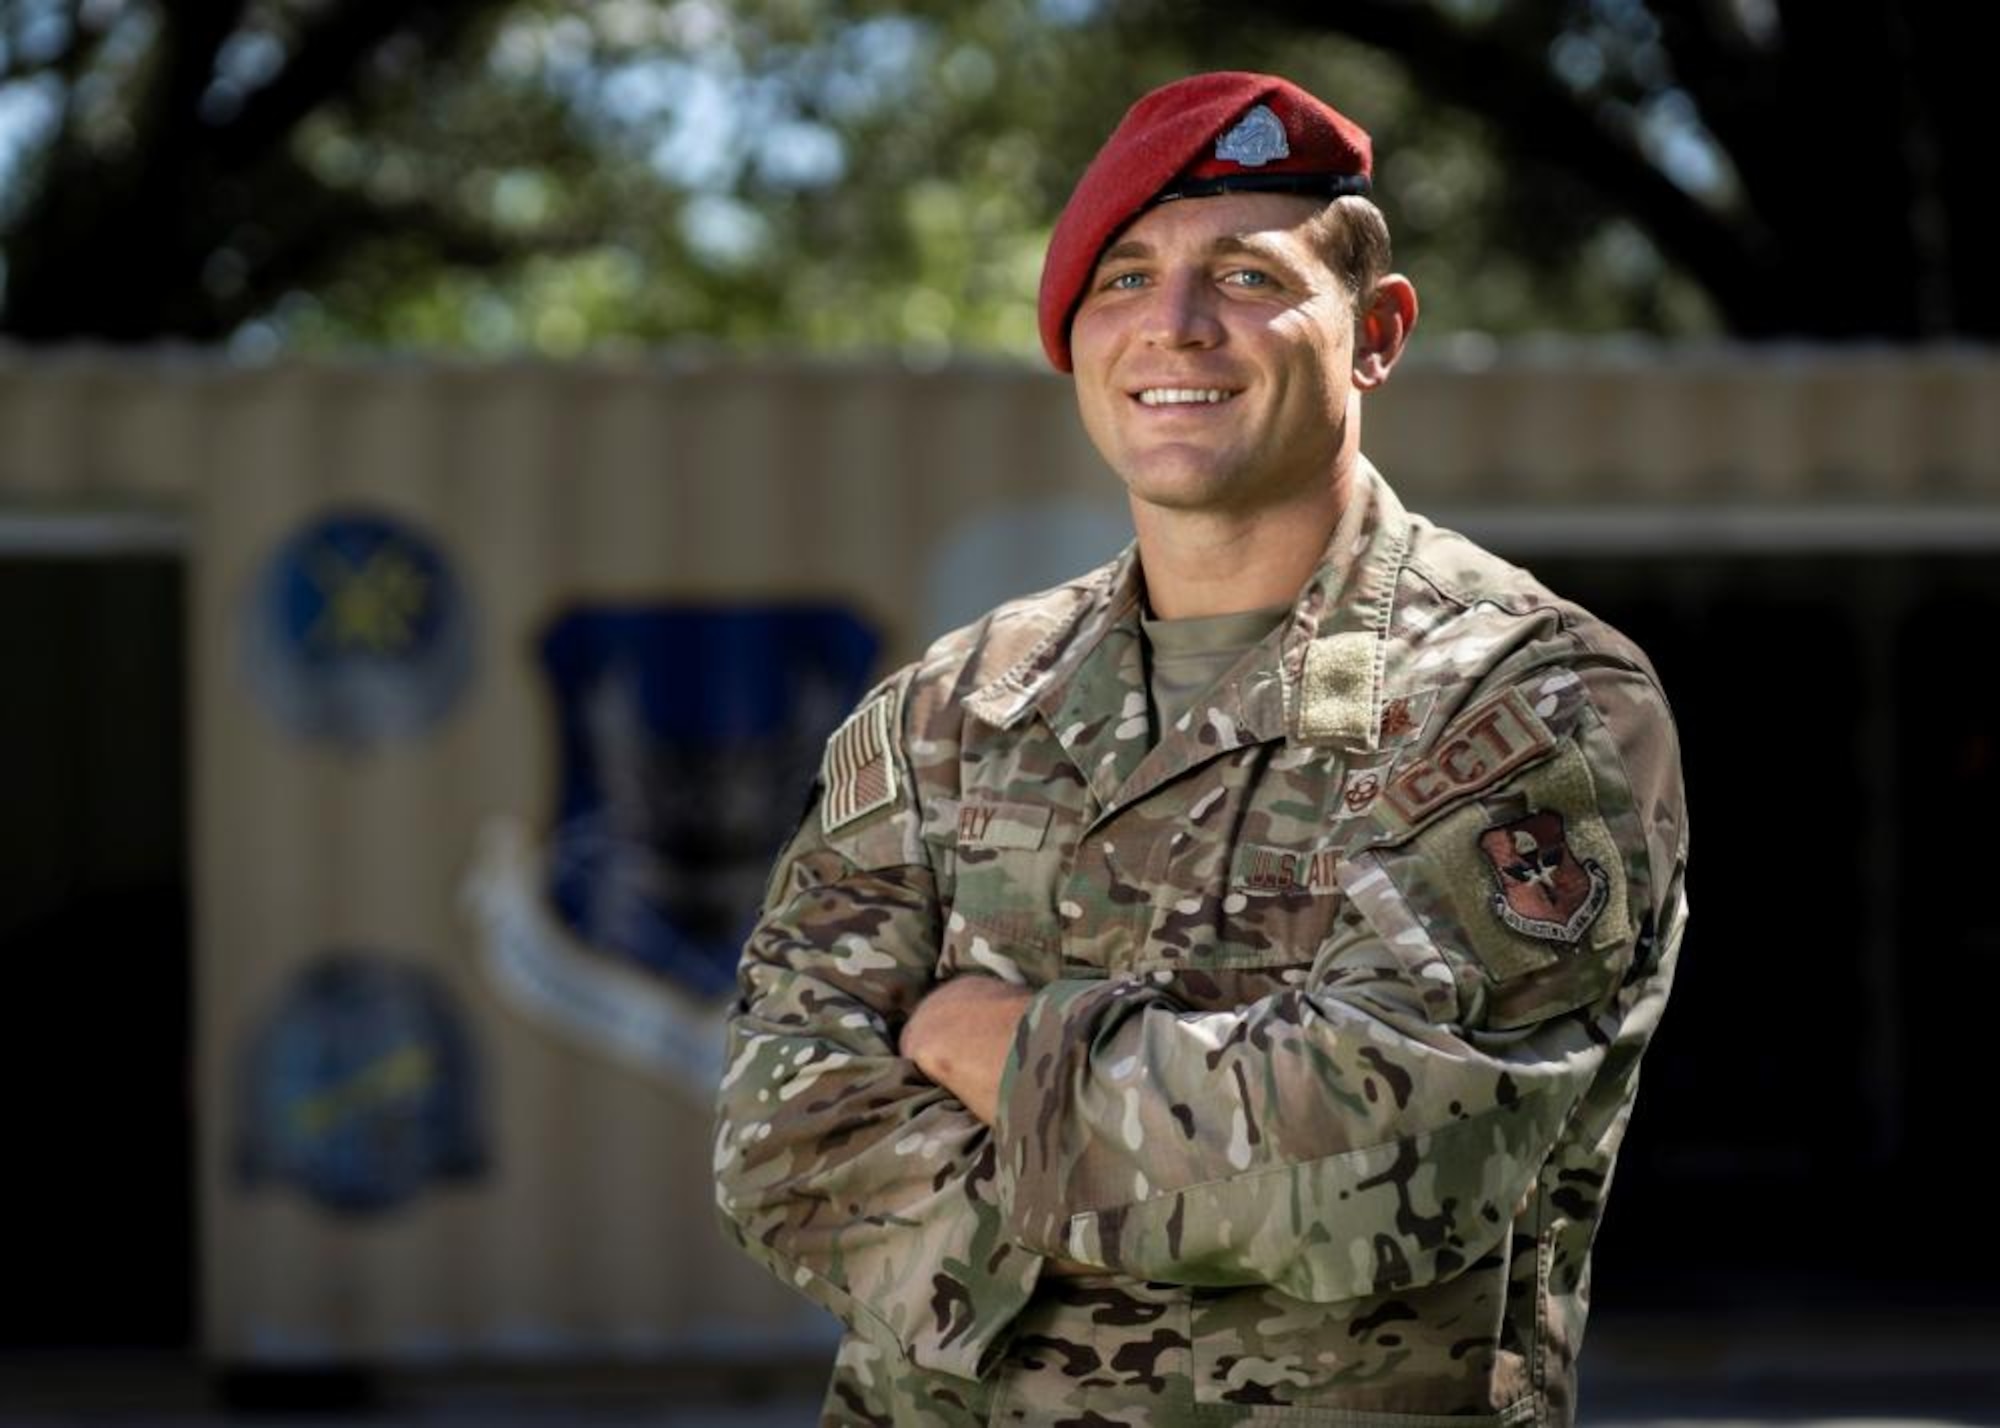 U.S. Air Force Master Sgt. Rylan Neely, 350th Special Warfare Training Squadron, SW Preparatory Course superintendent, poses for a portrait after his selection as the 2020 Air Force Special Warfare Combat Controller Noncommissioned Officer of the Year at Joint Base San Antonio, Texas, September 12, 2021.